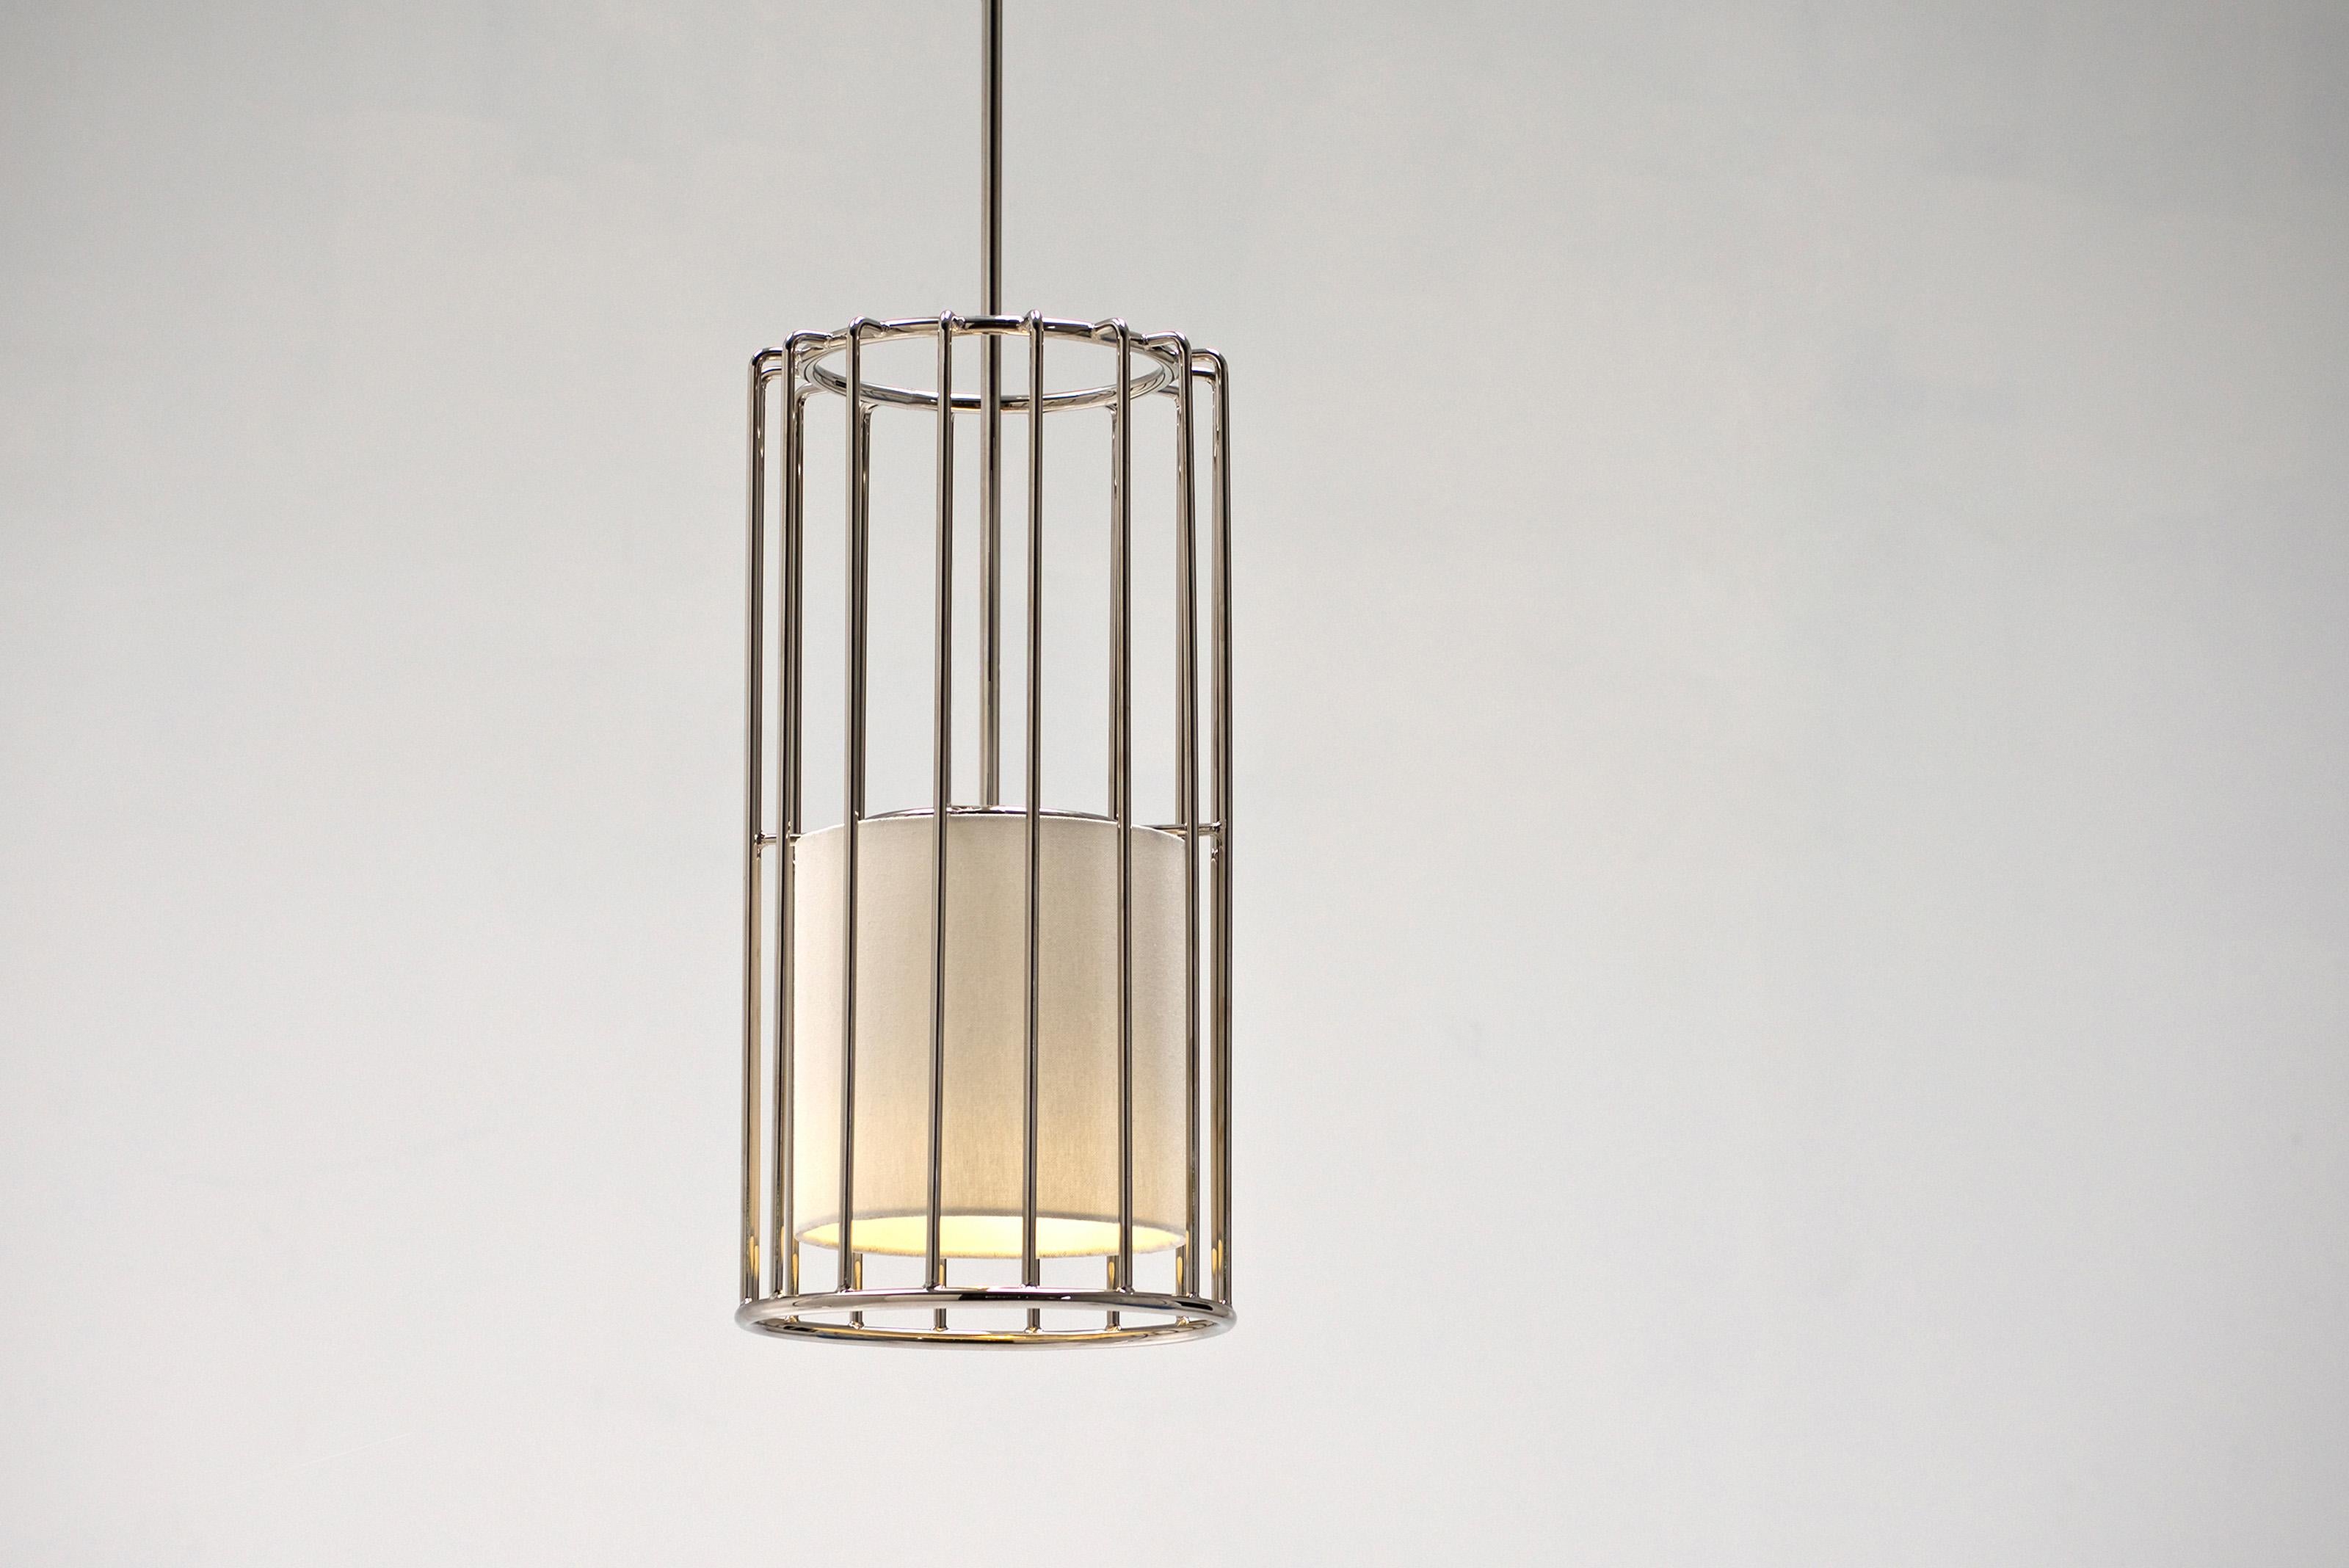 Inner Beauty Pendant Light by Phase Design
Dimensions: Ø 22.9 x H 45.7 cm. 
Materials: Linen and polished chrome.

Solid steel bar available in a smoked brass, polished chrome, burnt copper, gloss or flat black and white powder coat. Powder coat